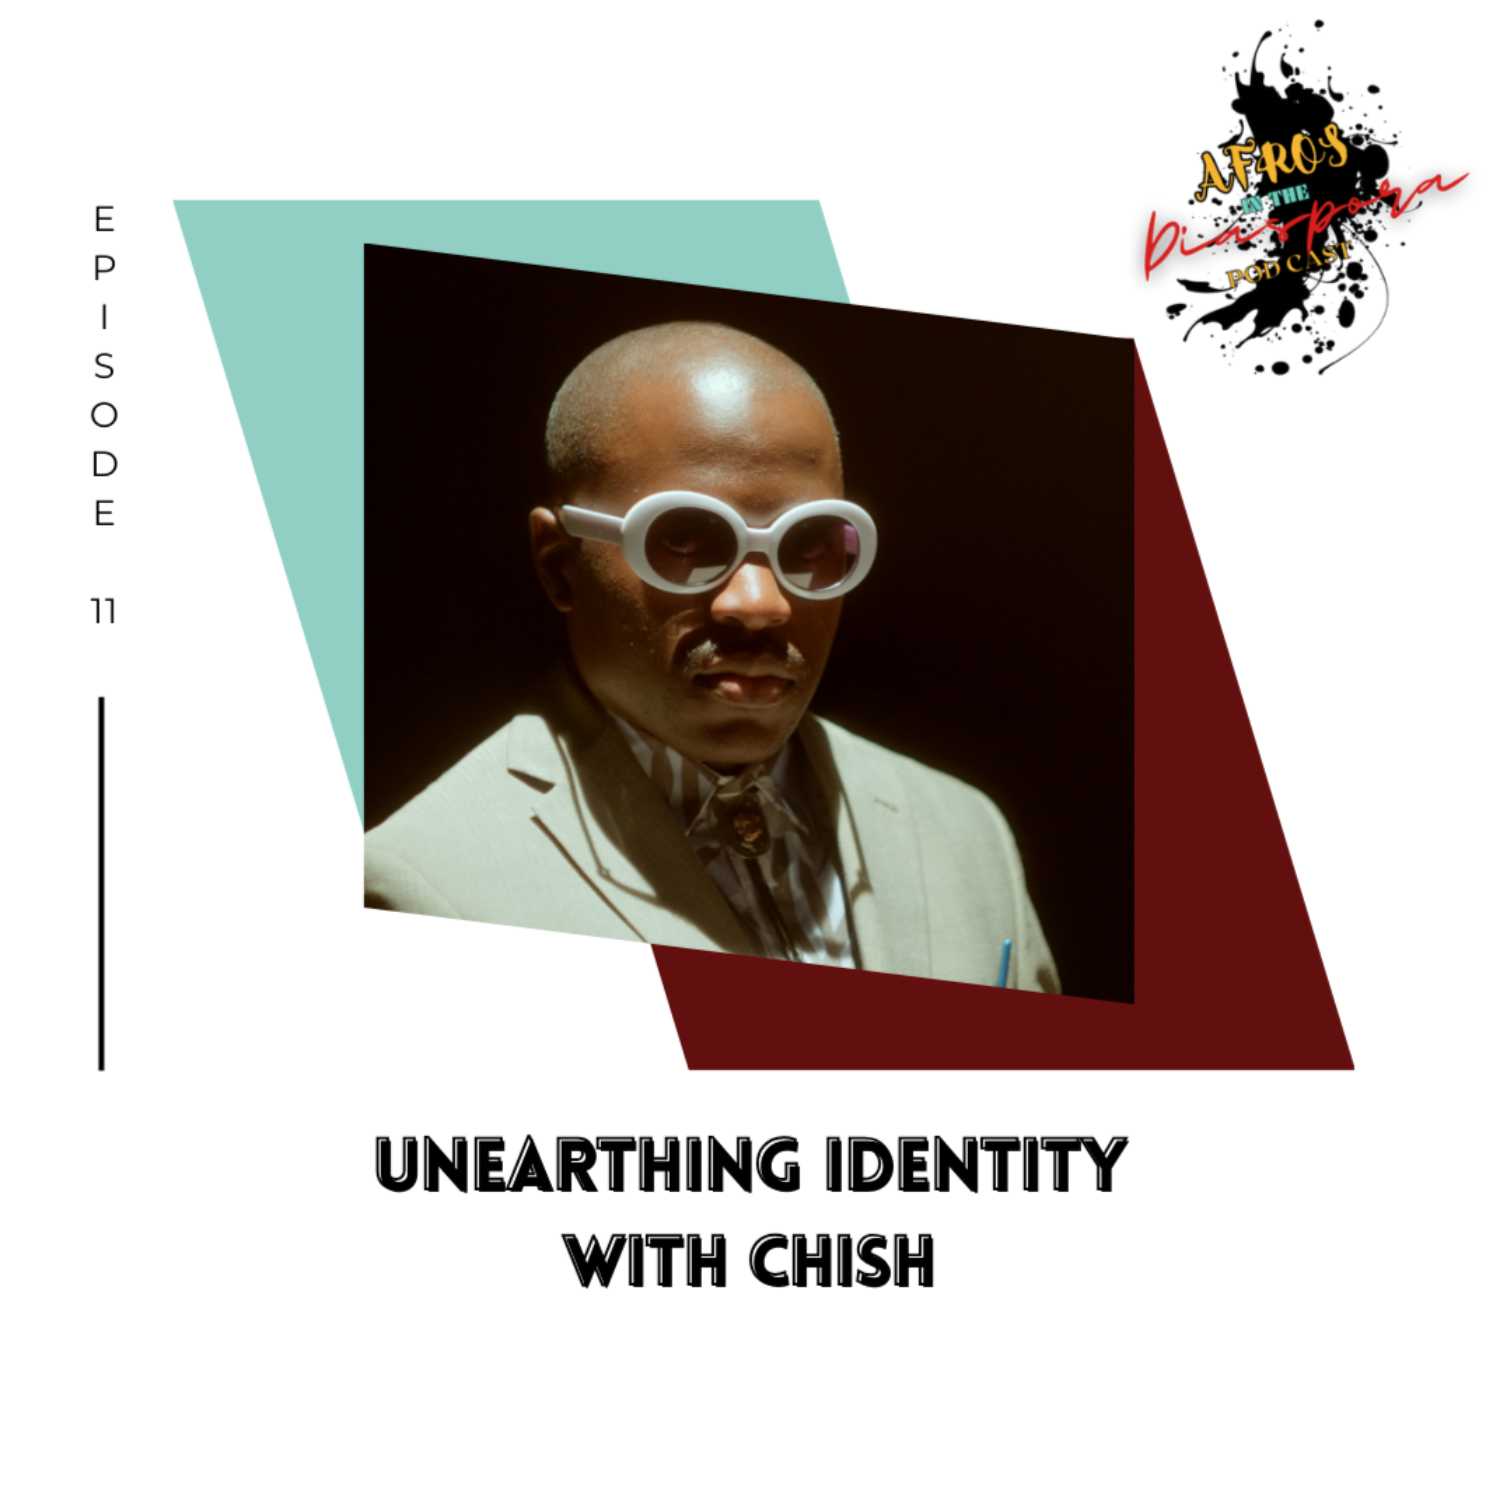 Unearthing Identity with Chish